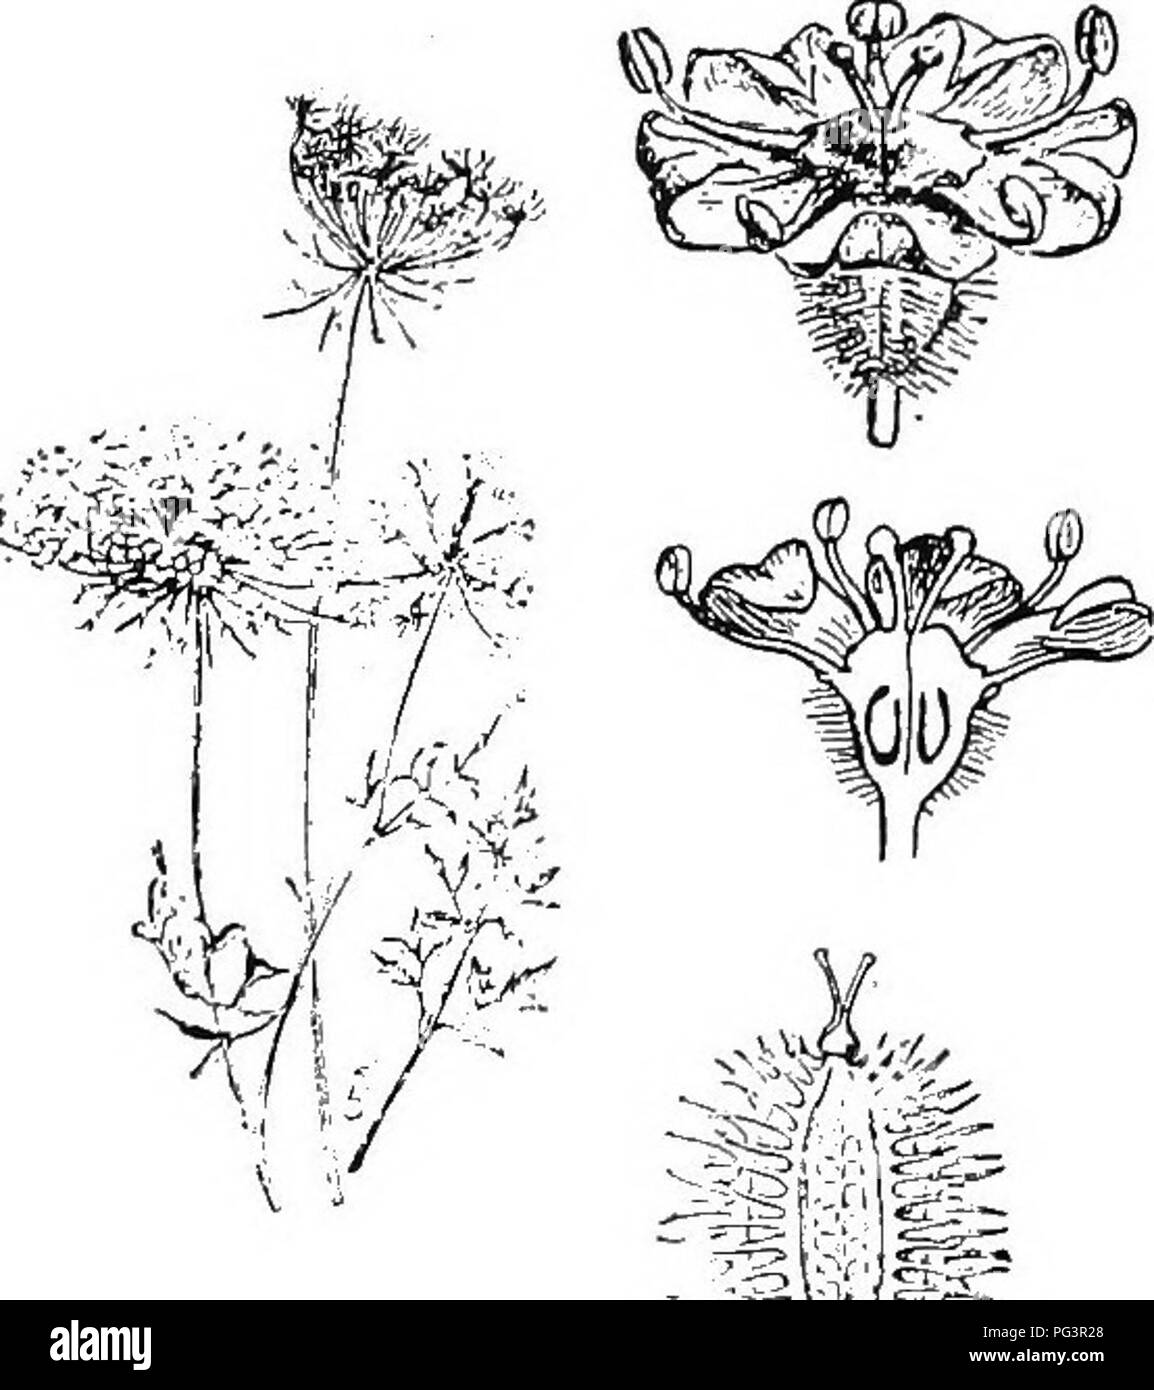 . Botany for agricultural students . Botany. 488 ANGIOSPERMS Parsley Family (Umbelliferae). â The Parsley family com- prises about 1300 species. The small epigynous flowers are borne in umbels, â whence the name of the family (Fig. 436). The stamens and parts of the calyx and corolla are five. The pistil consists of two partly united carpels which separate in the fruit. Carrots, Parsnips, Celery, and Fennel are mem- bers of this family. This family also contains some bad weeds. The poison Hemlock {Conium maculatum) and Water Hemlock {Cituta maculata) are two very poisonous plants, which often  Stock Photo